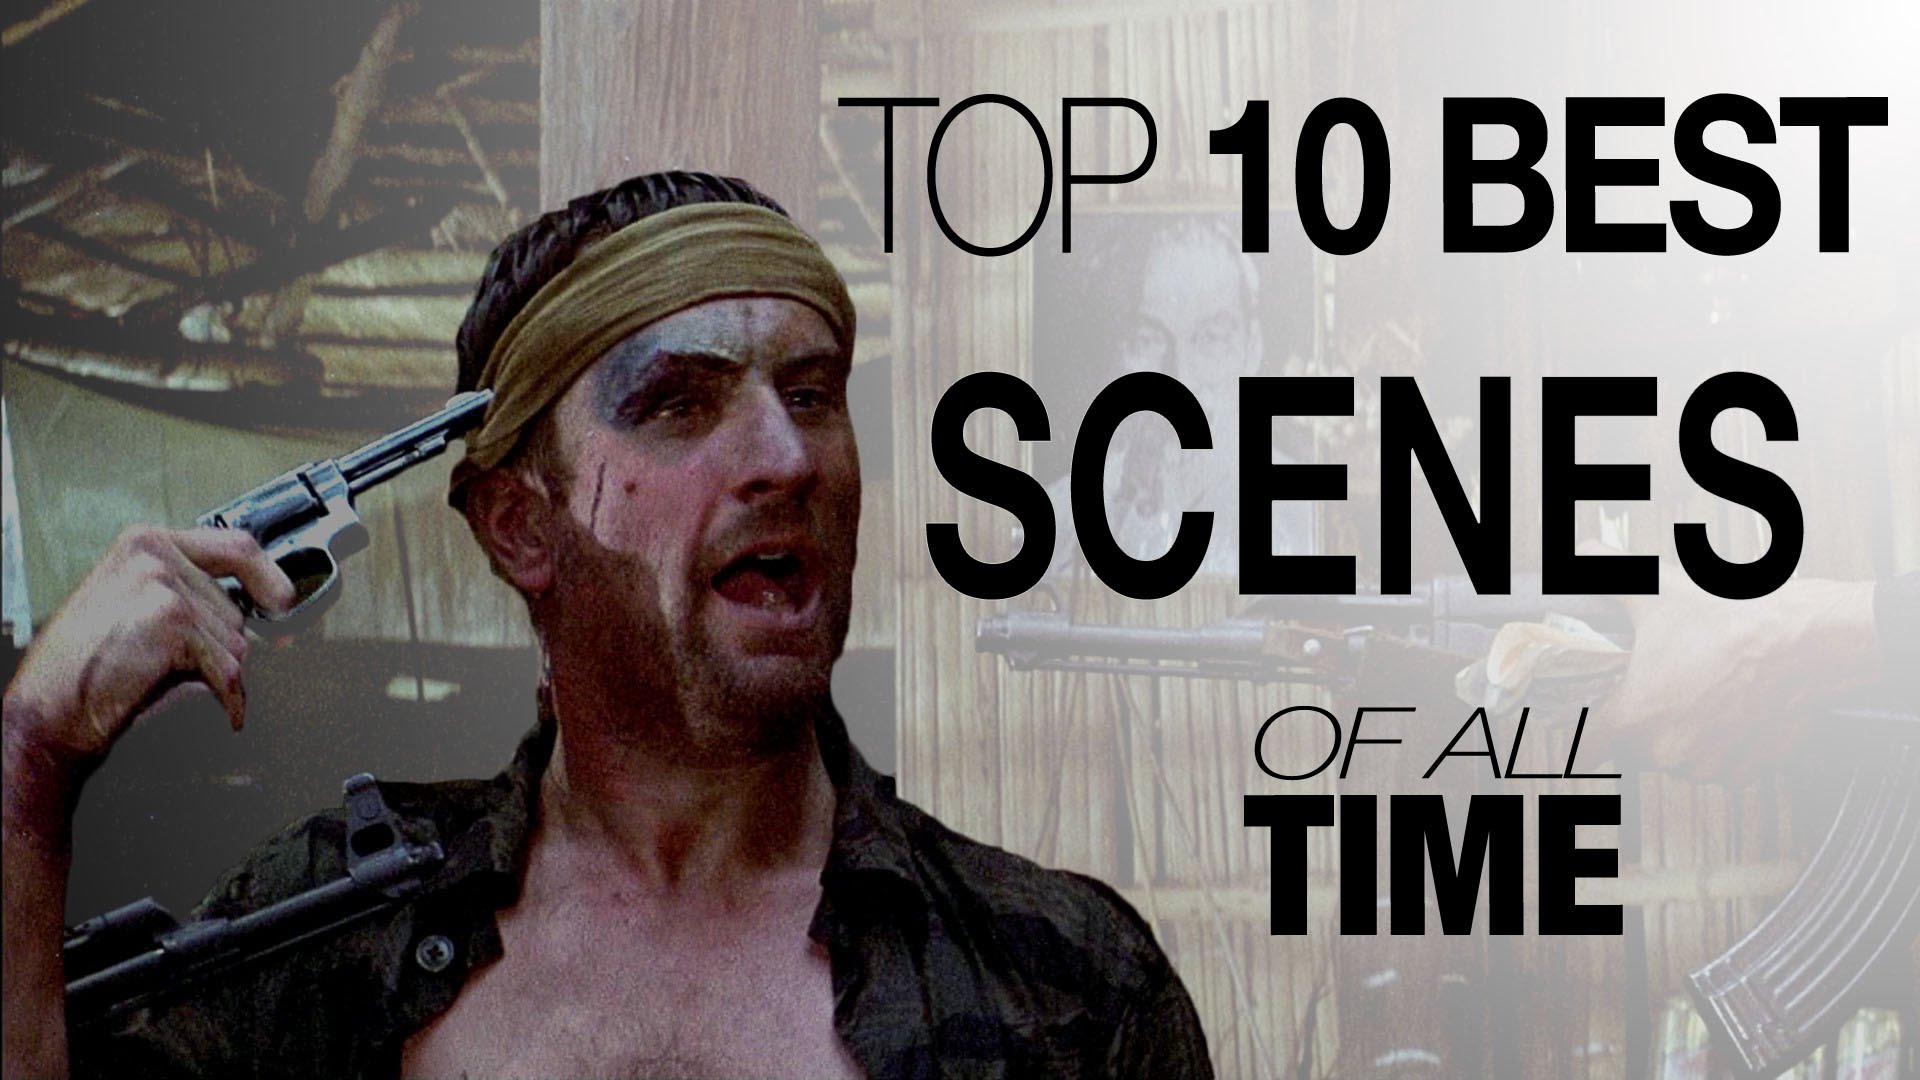 Top 10 Best Scenes of All Time | Top Entertainment News1920 x 1080